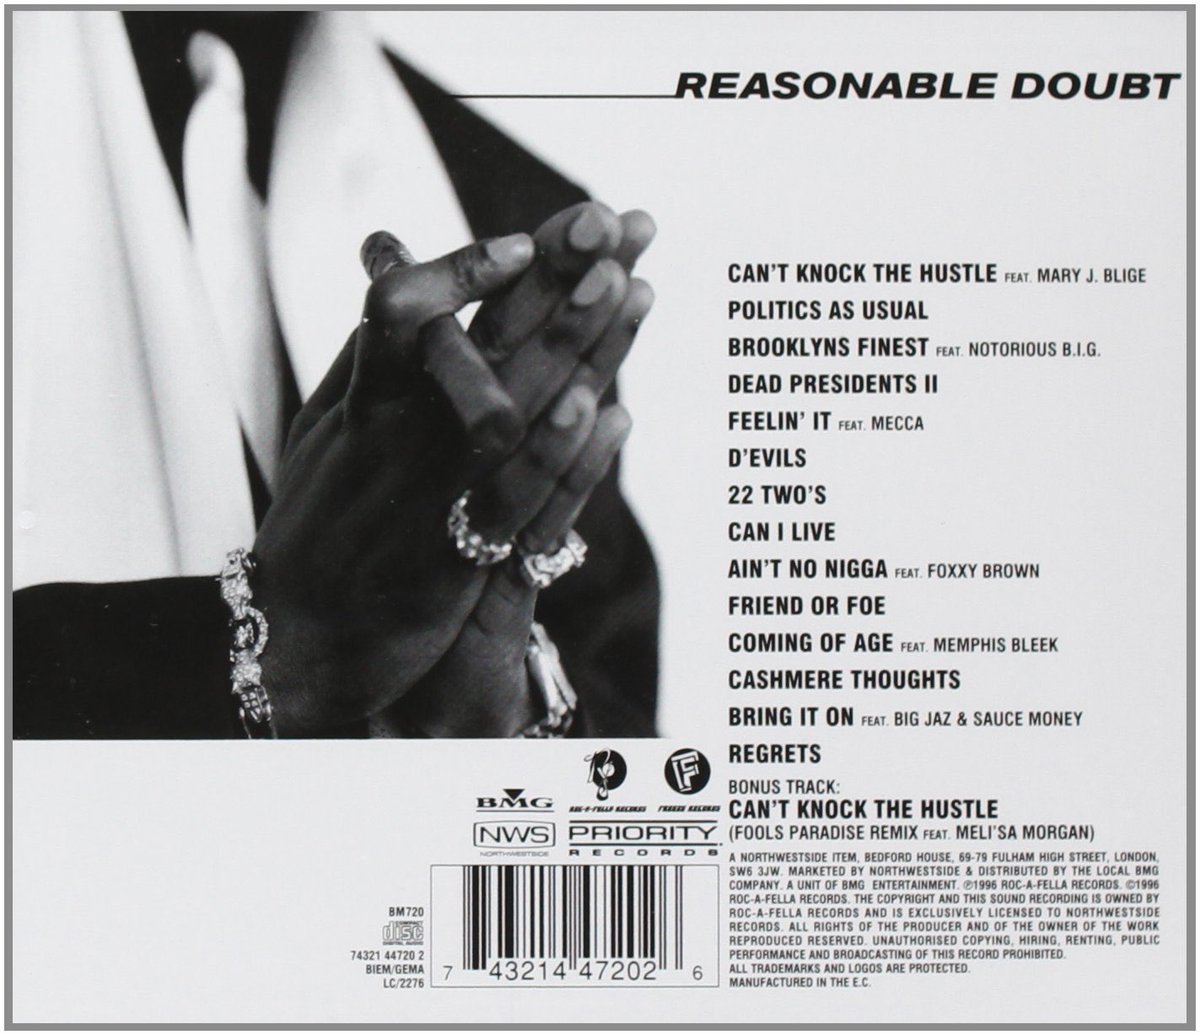 1. Reasonable DoubtEvery track is a classic, other than perhaps the illmatic, there has never been an introduction album this great, although I dont think he’s topped this, that isn’t a knock as classics came after itFavorite track: d’evils, dead presidents 2,regrets